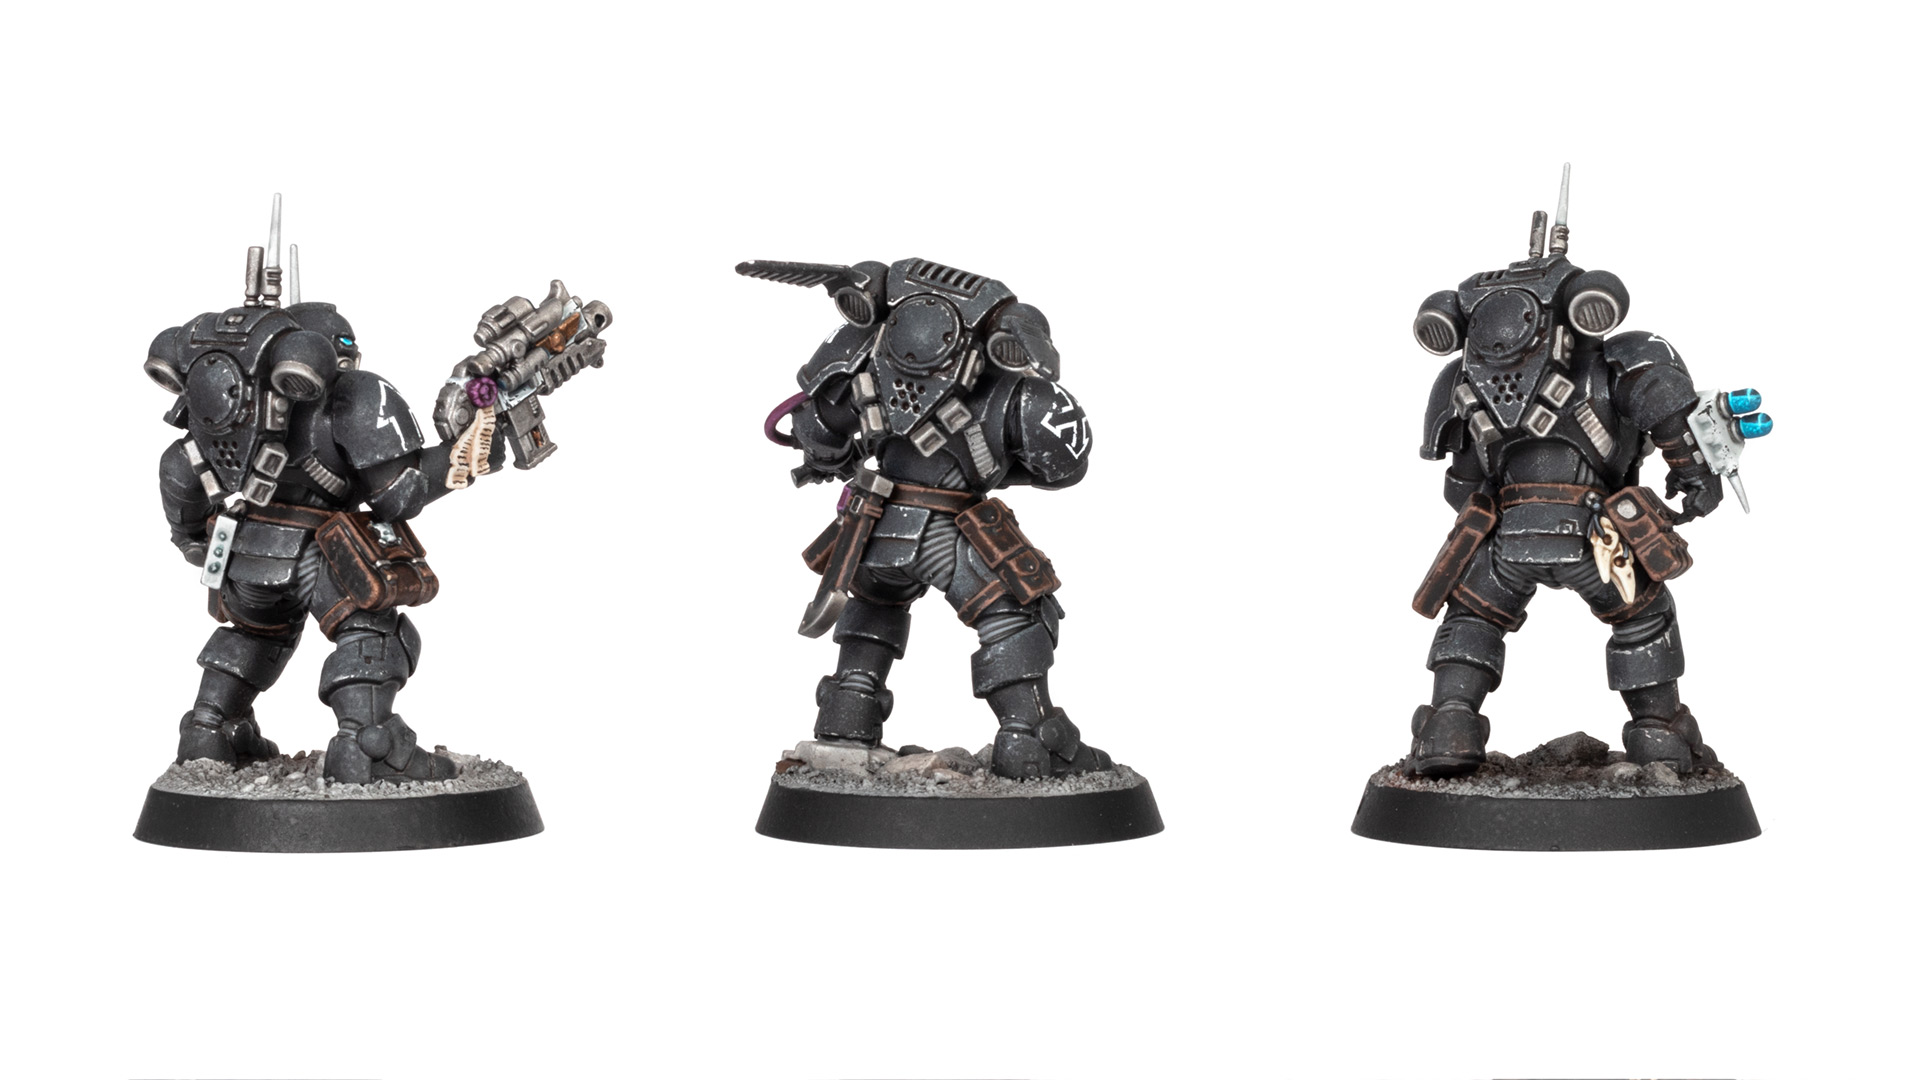 Raven Guard Primaris Phobos Strike Team Infiltrator Saboteur,  Reiver Sergeant, Veteran, and Helix Adept, back view, painted by Stahly